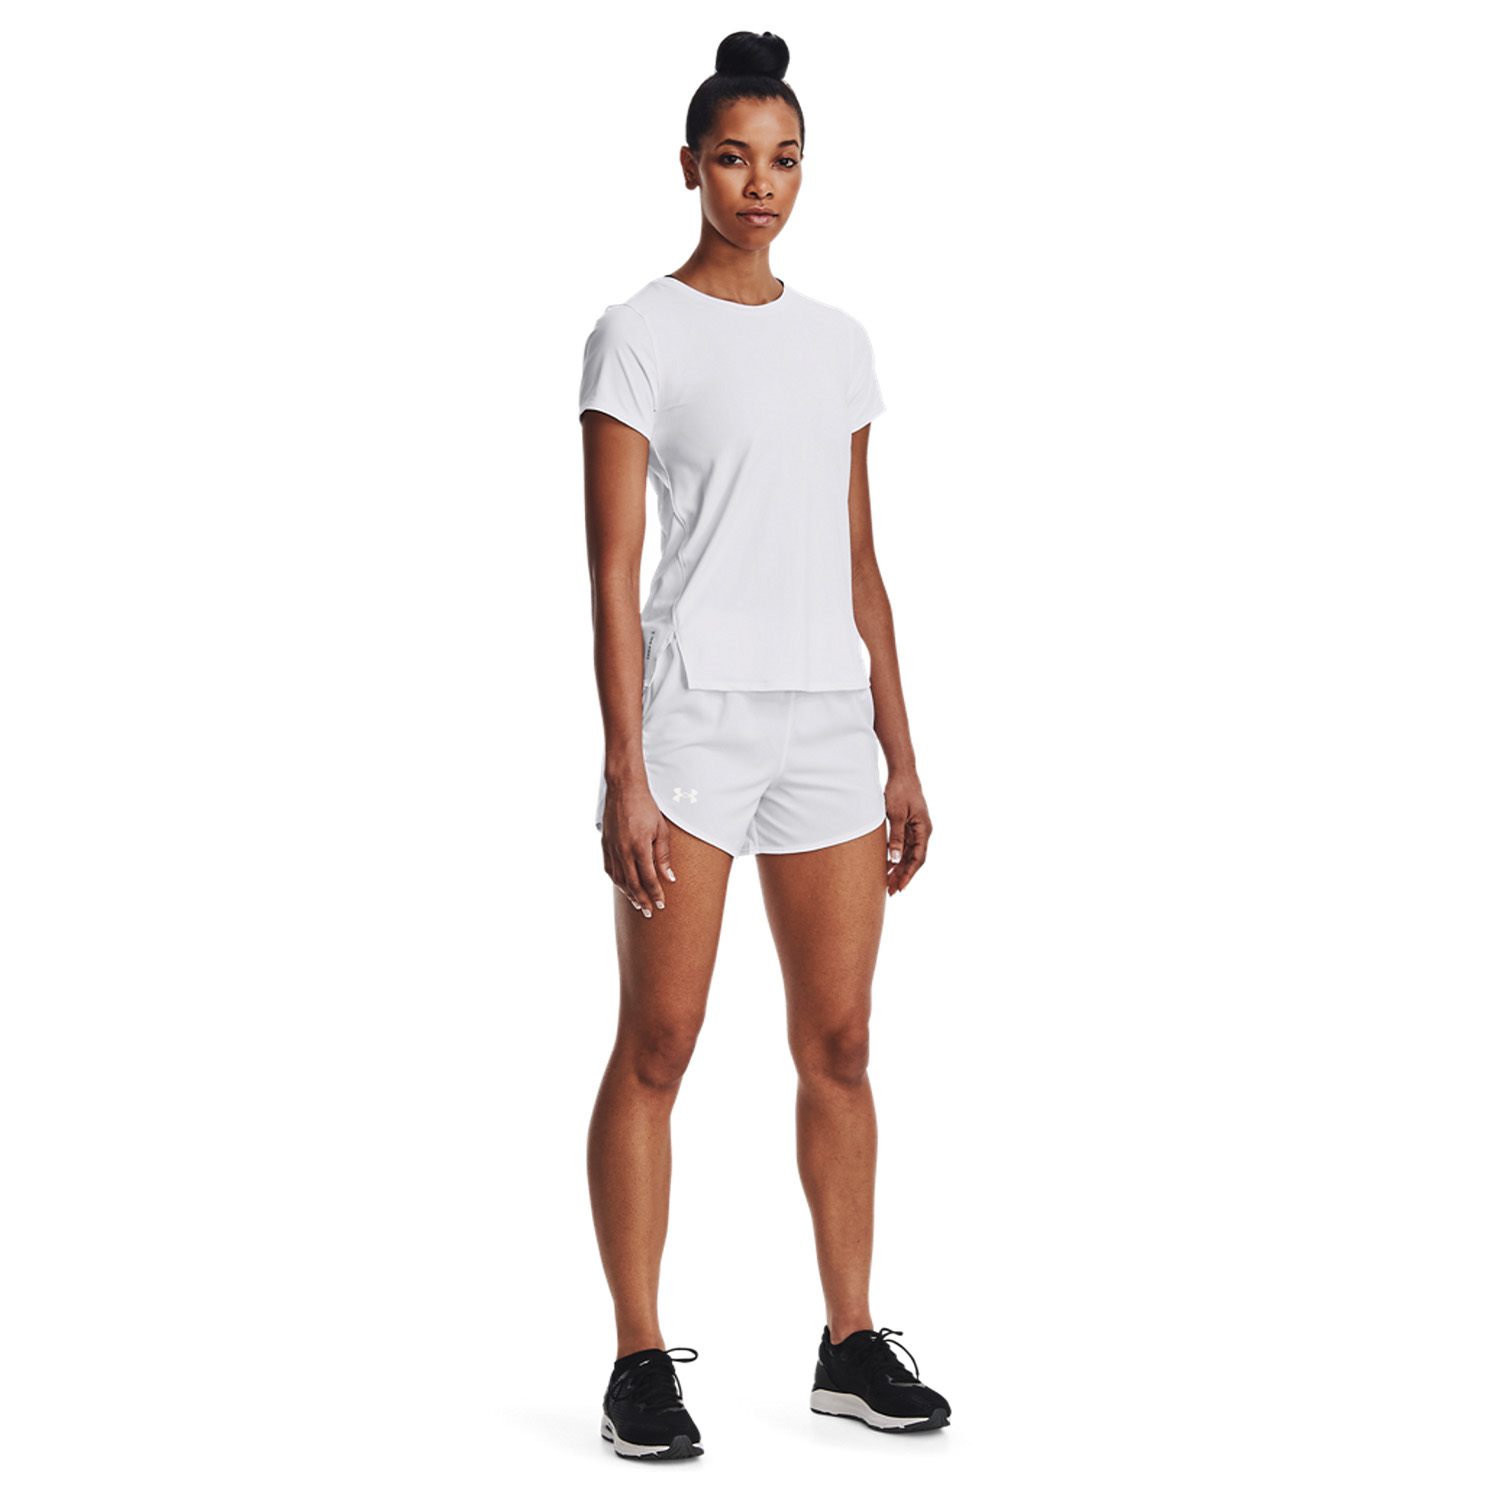 Under Armour IsoChill 200 Laser T-Shirt - White/Reflective